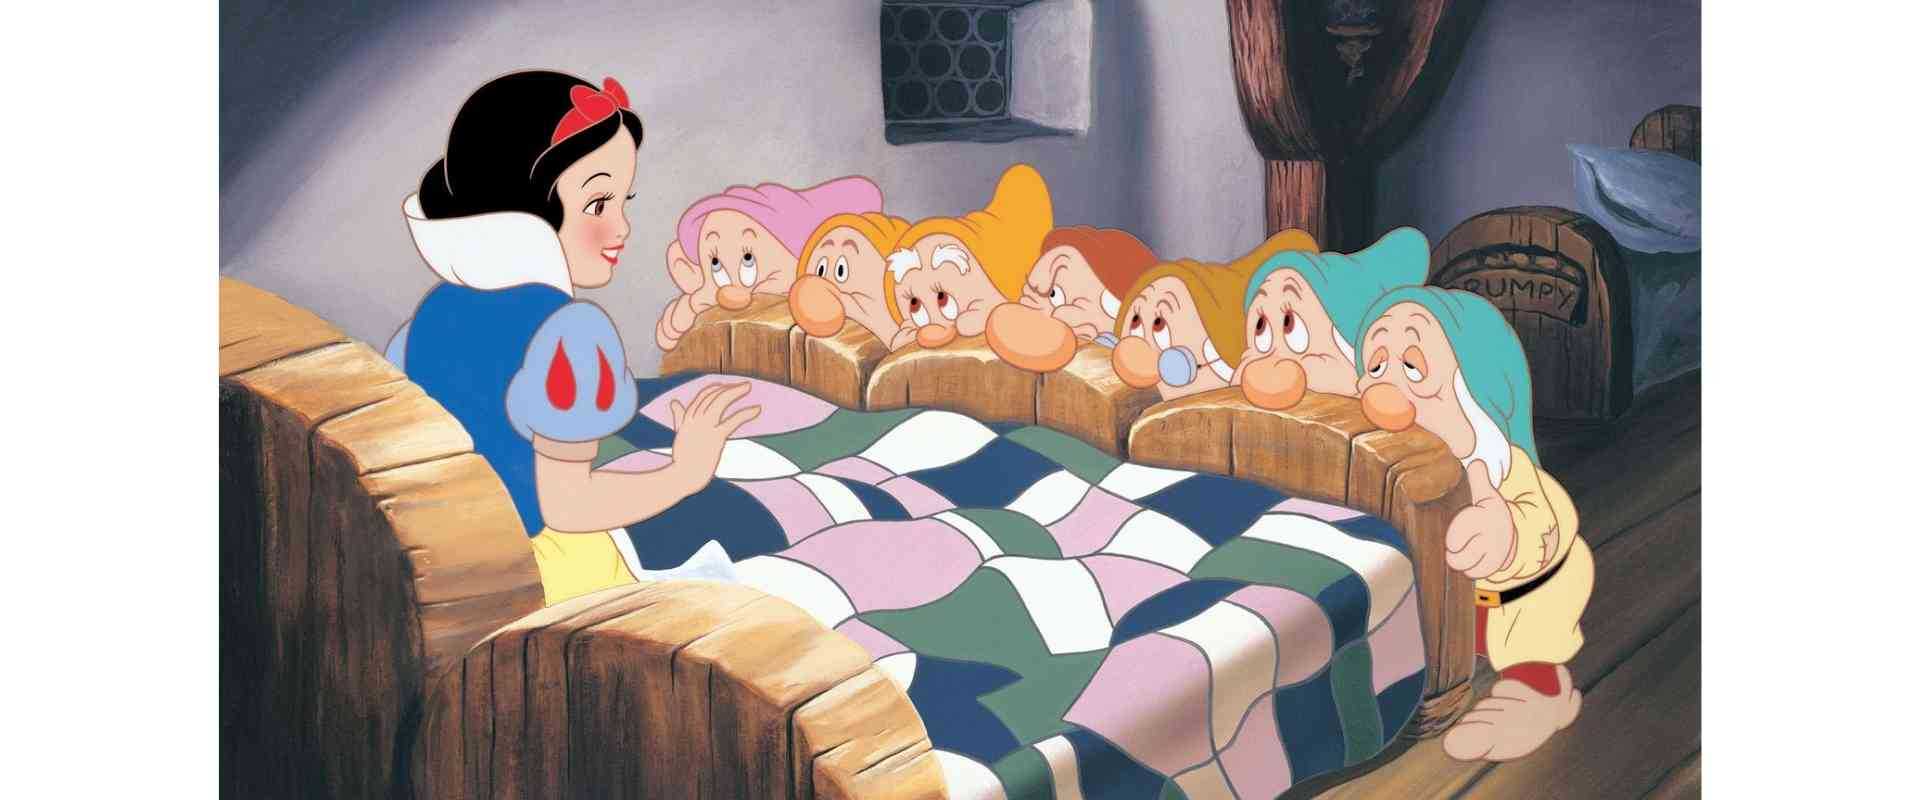  Example of Rotoscope Animation in the animated cartoon Snow White and the 7 Dwarves